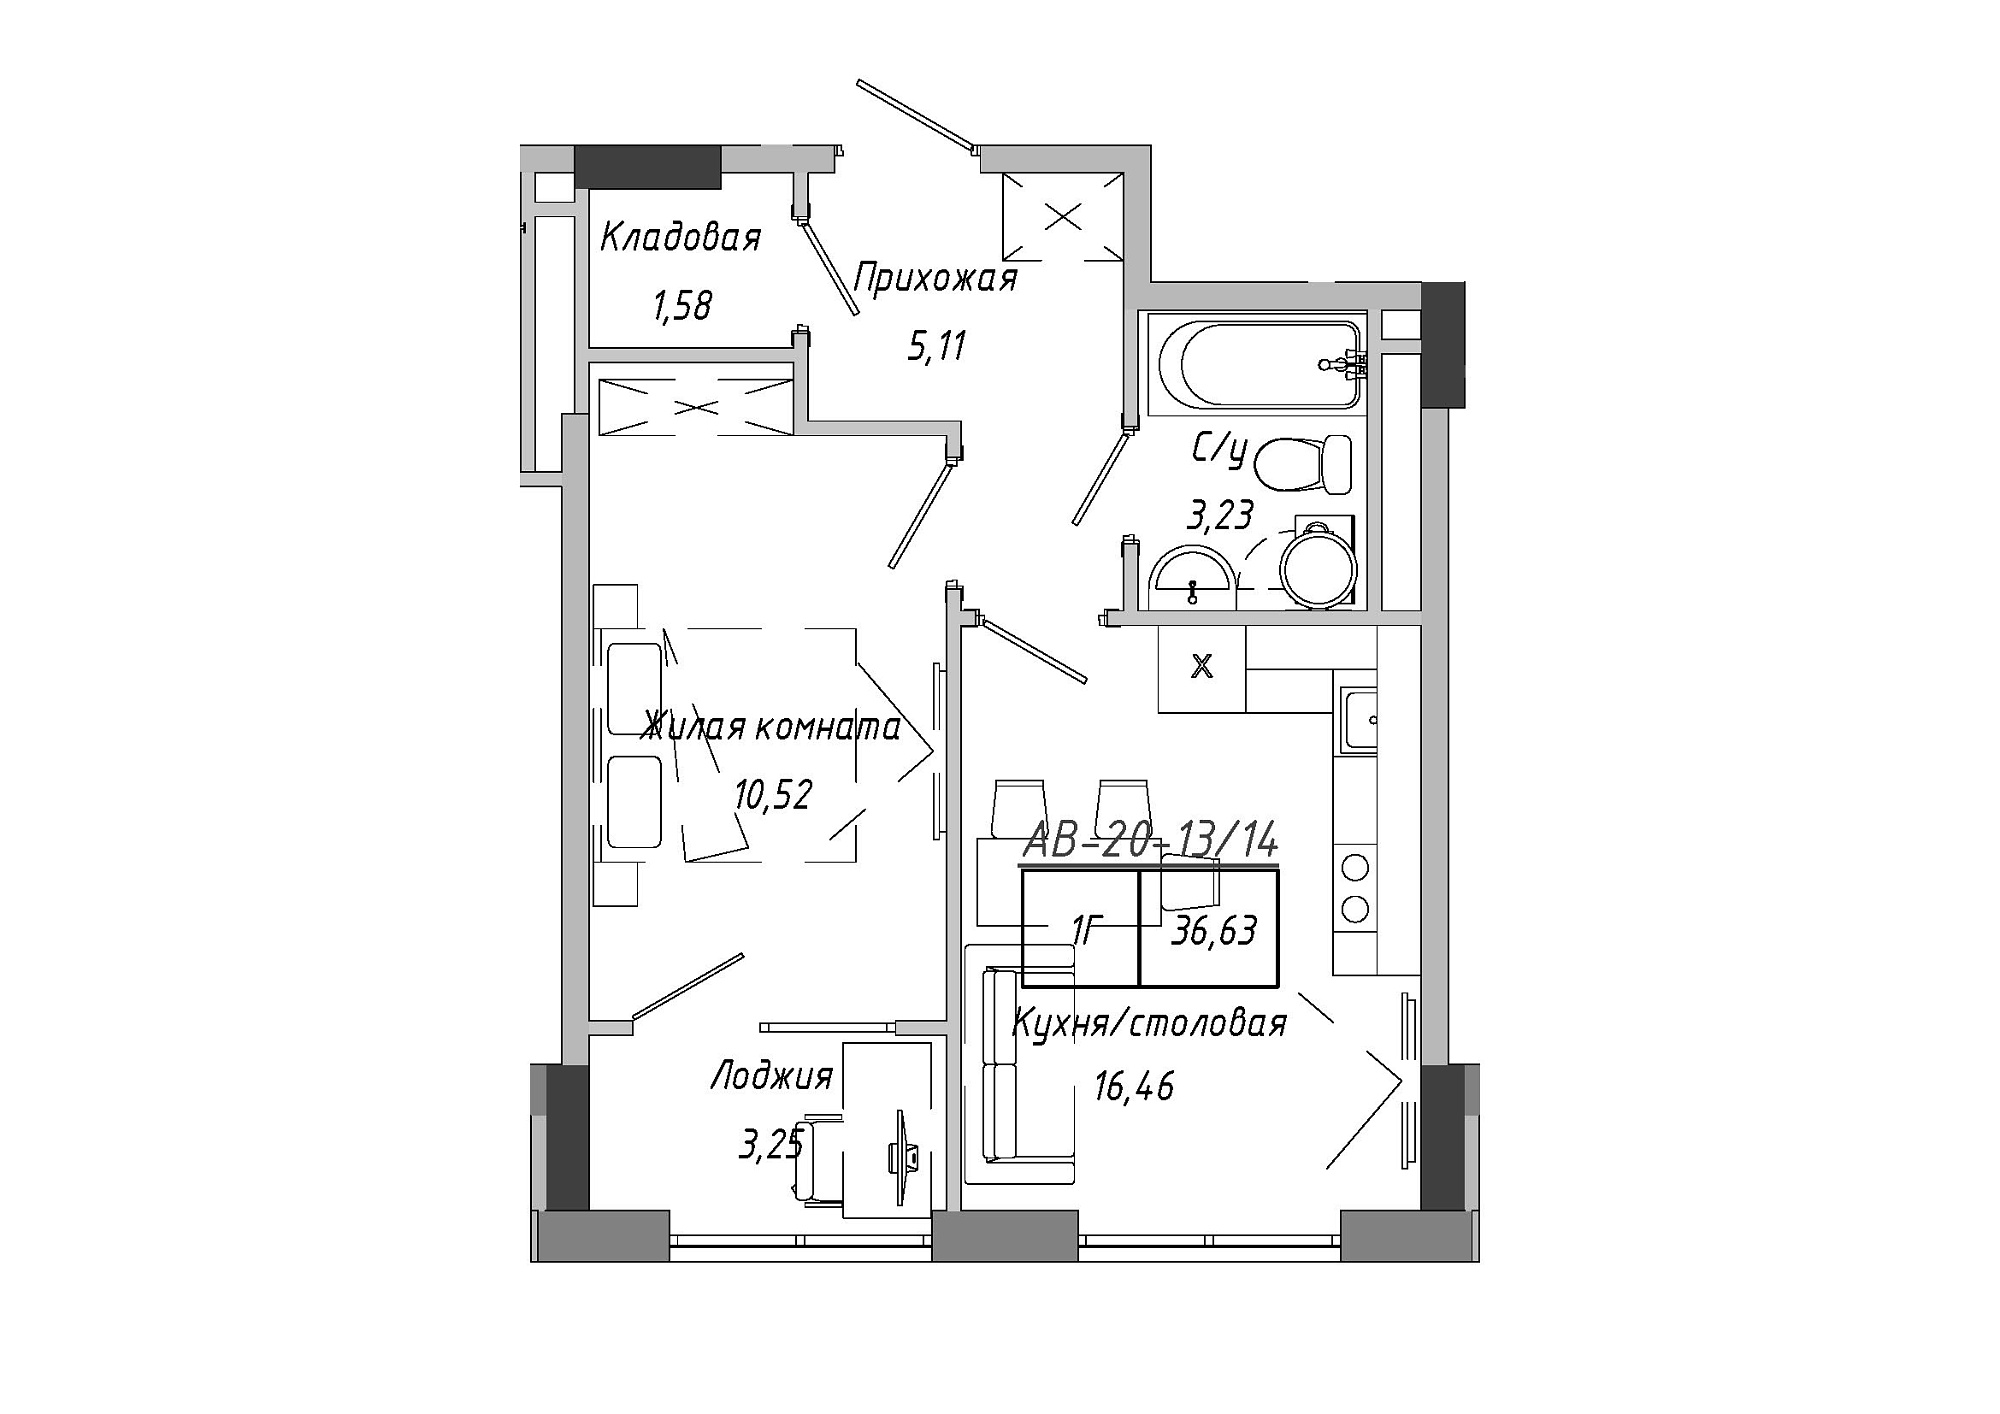 Planning 1-rm flats area 36.63m2, AB-20-13/00114.